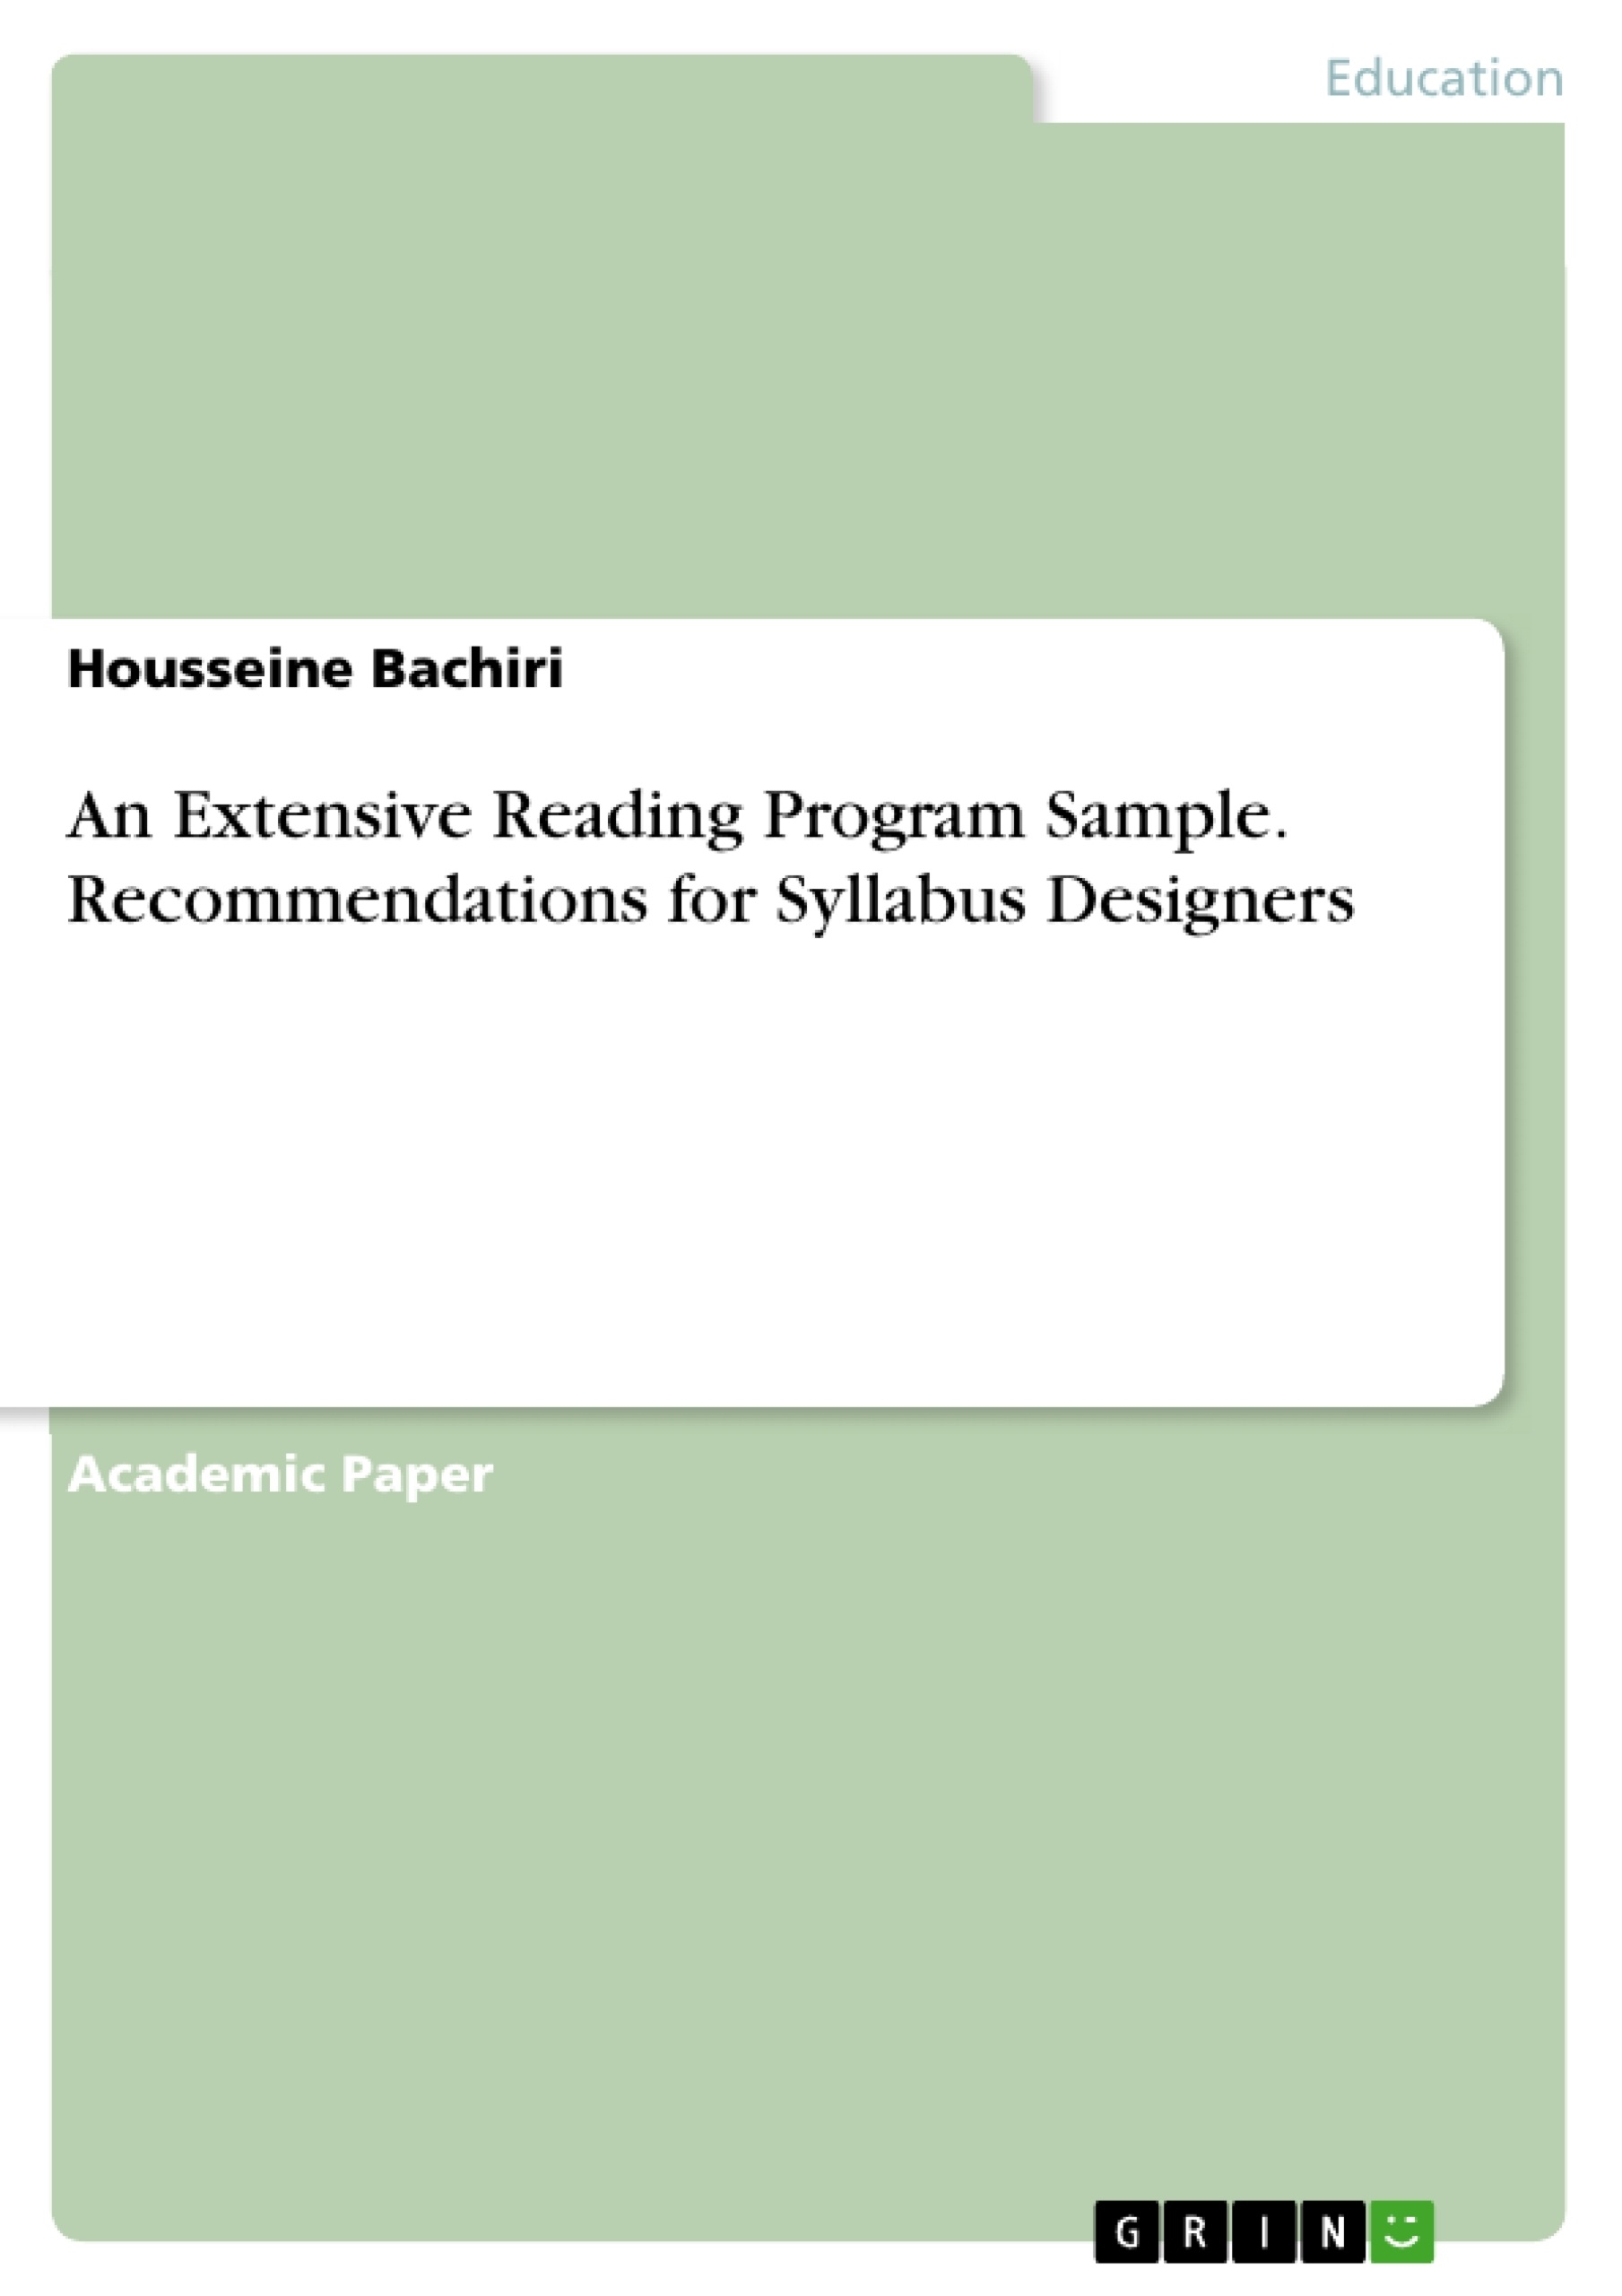 Title: An Extensive Reading Program Sample. Recommendations for Syllabus Designers